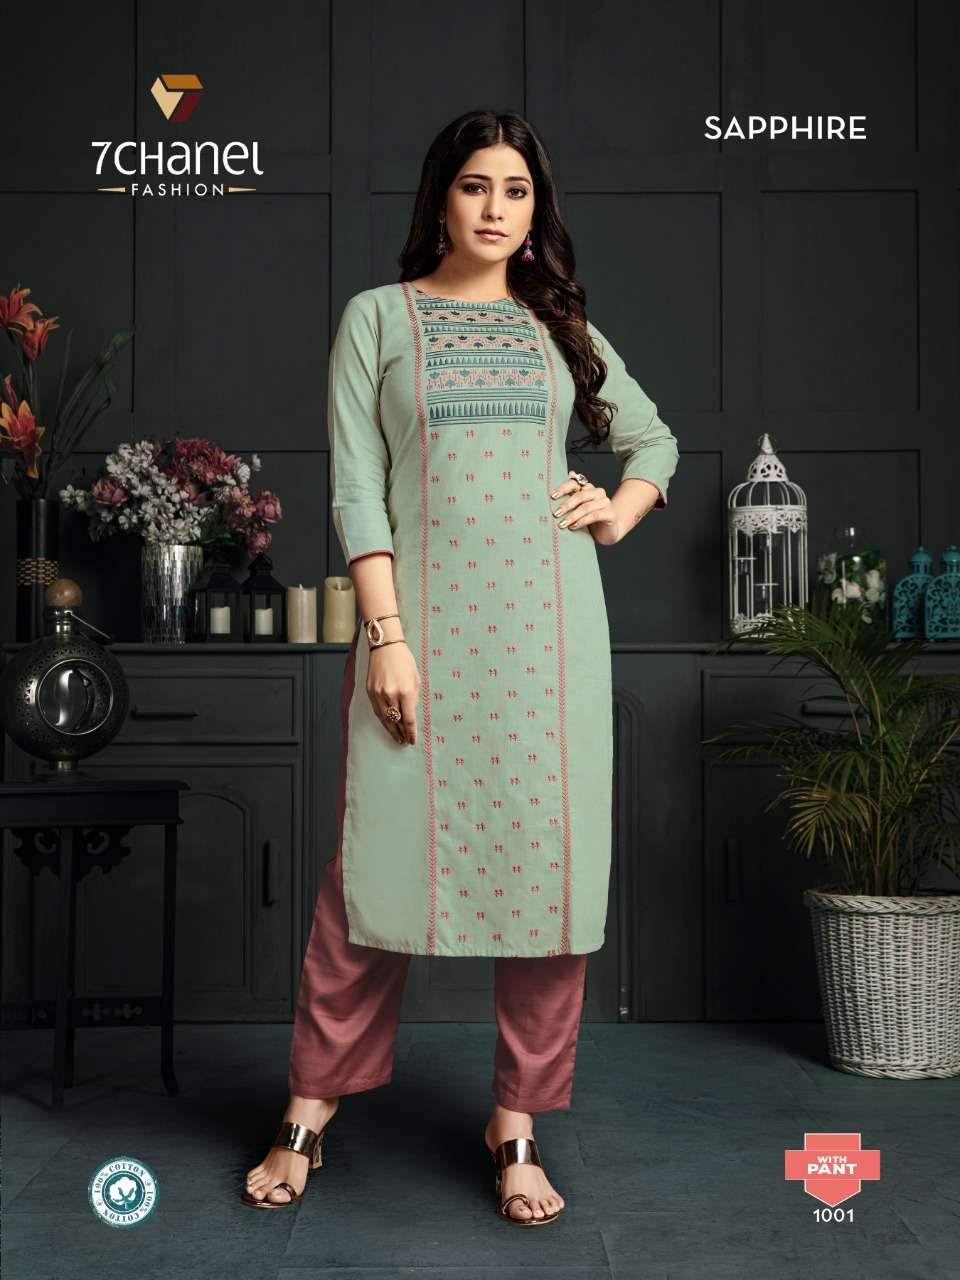 SAPPHIRE WITH PANT BY 7 CHANEL 1001 TO 1004 SERIES BEAUTIFUL STYLISH FANCY COLORFUL CASUAL WEAR & ETHNIC WEAR PURE COTTON PRINTED KURTIS AT WHOLESALE PRICE